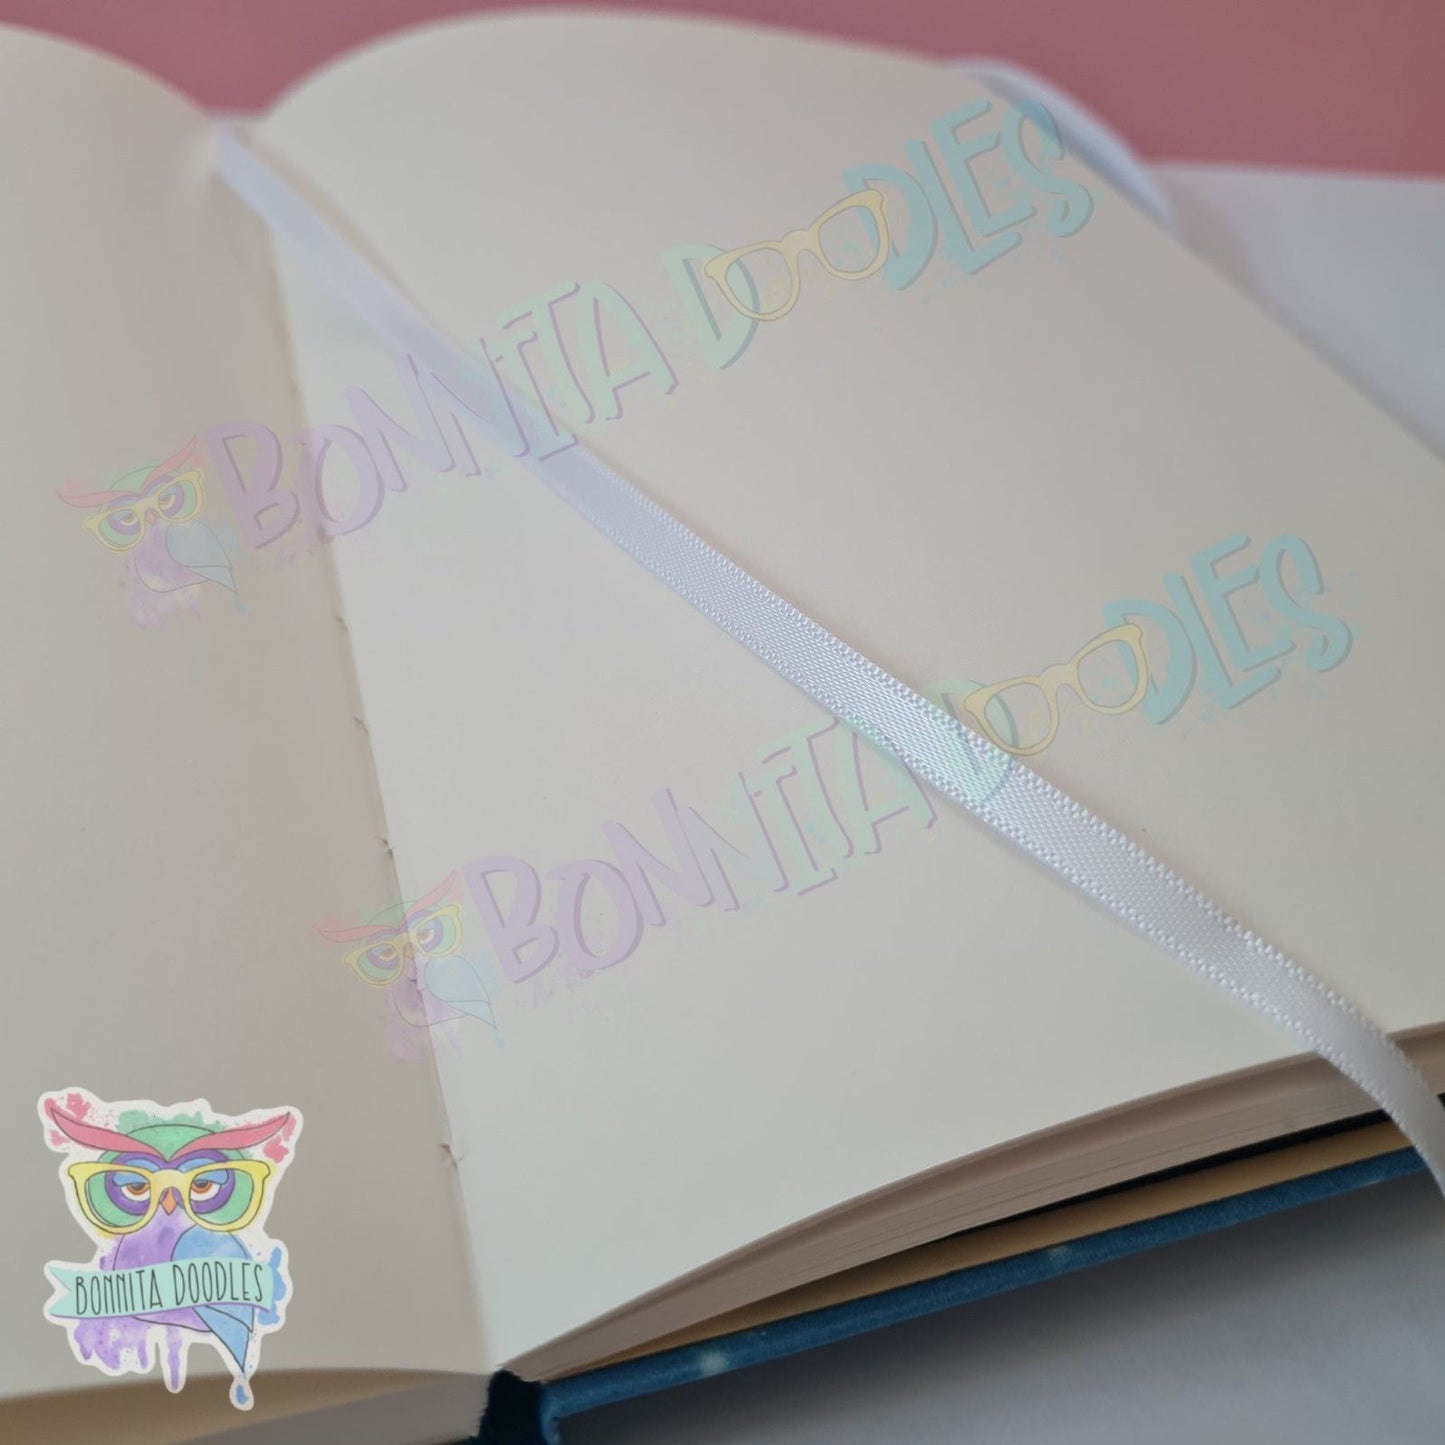 Brain frog journal - notebook - perfect gift